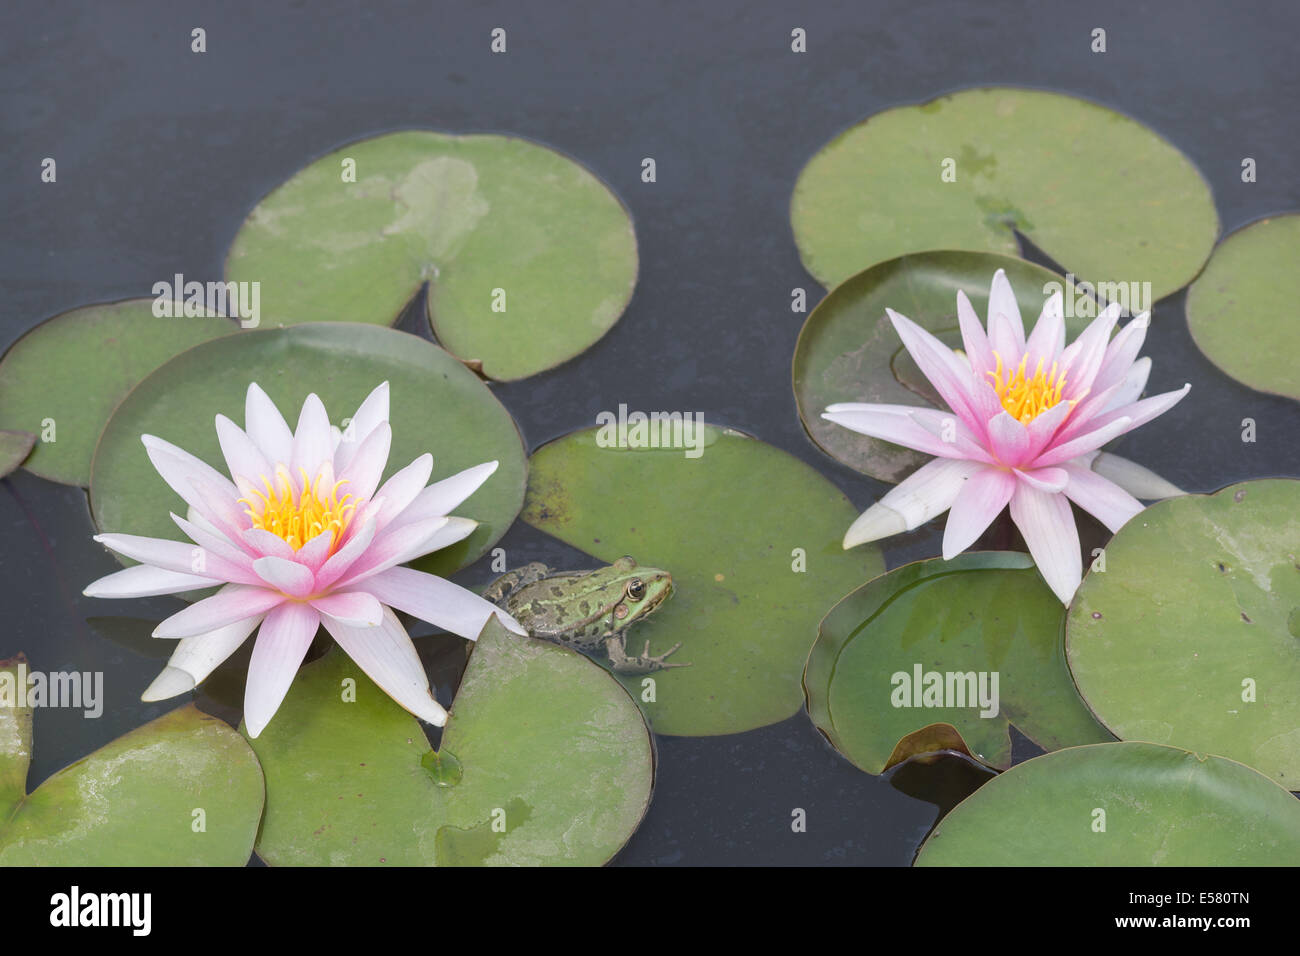 Two pink water lilies and the green frog Stock Photo